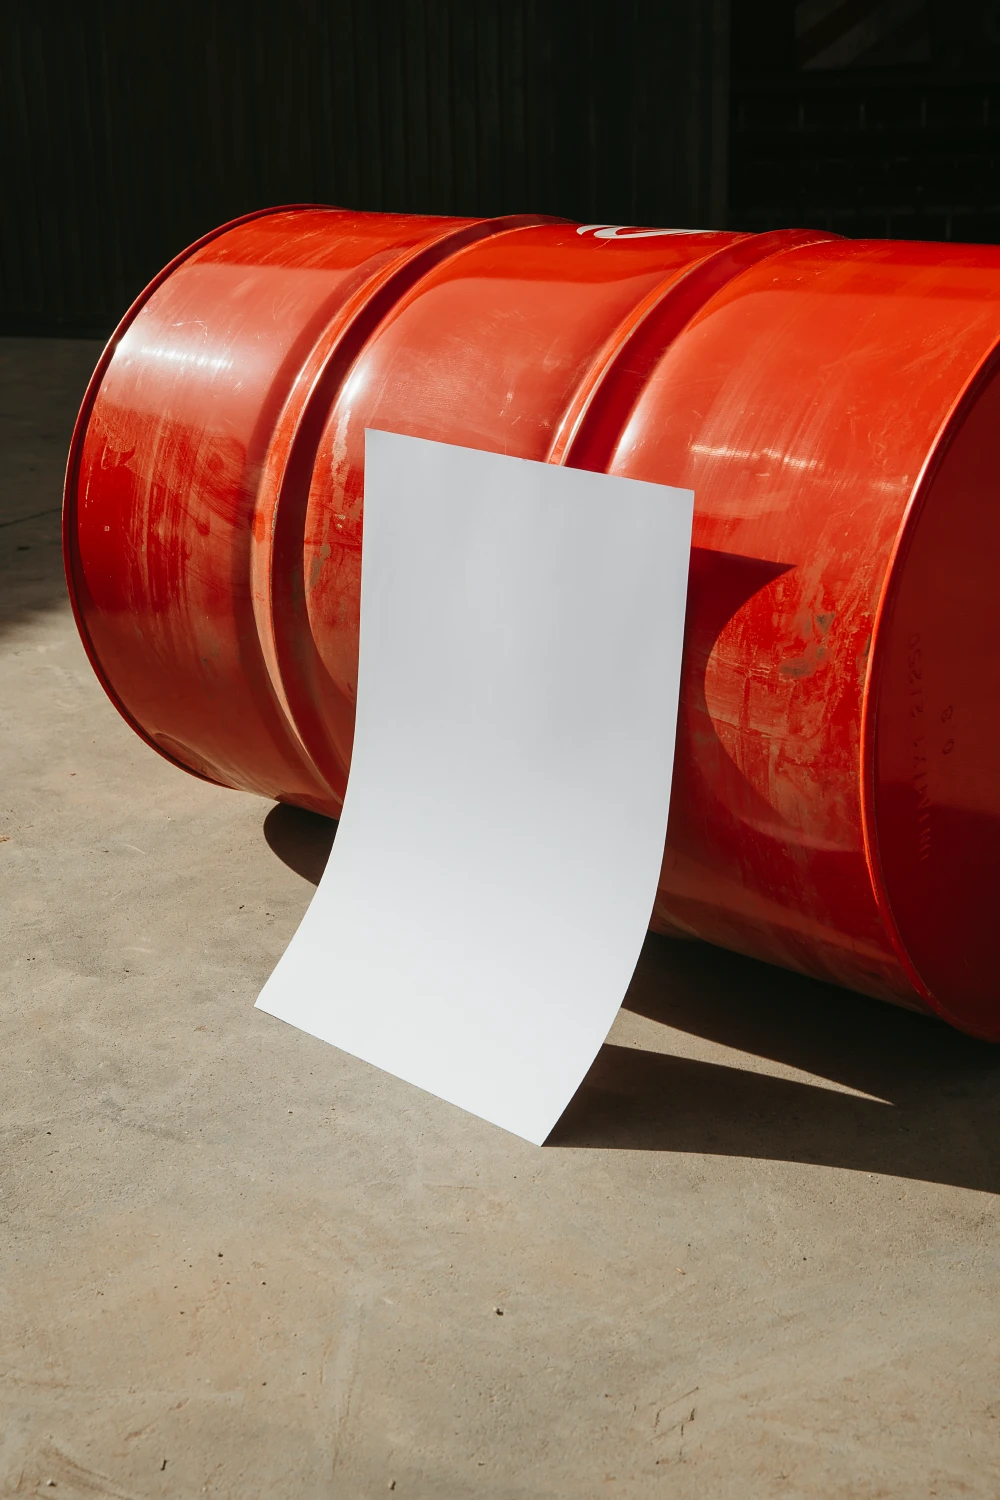 Creative poster mockup placed in the groundfloo against a red rusty barrel. The image has vertical orientation.